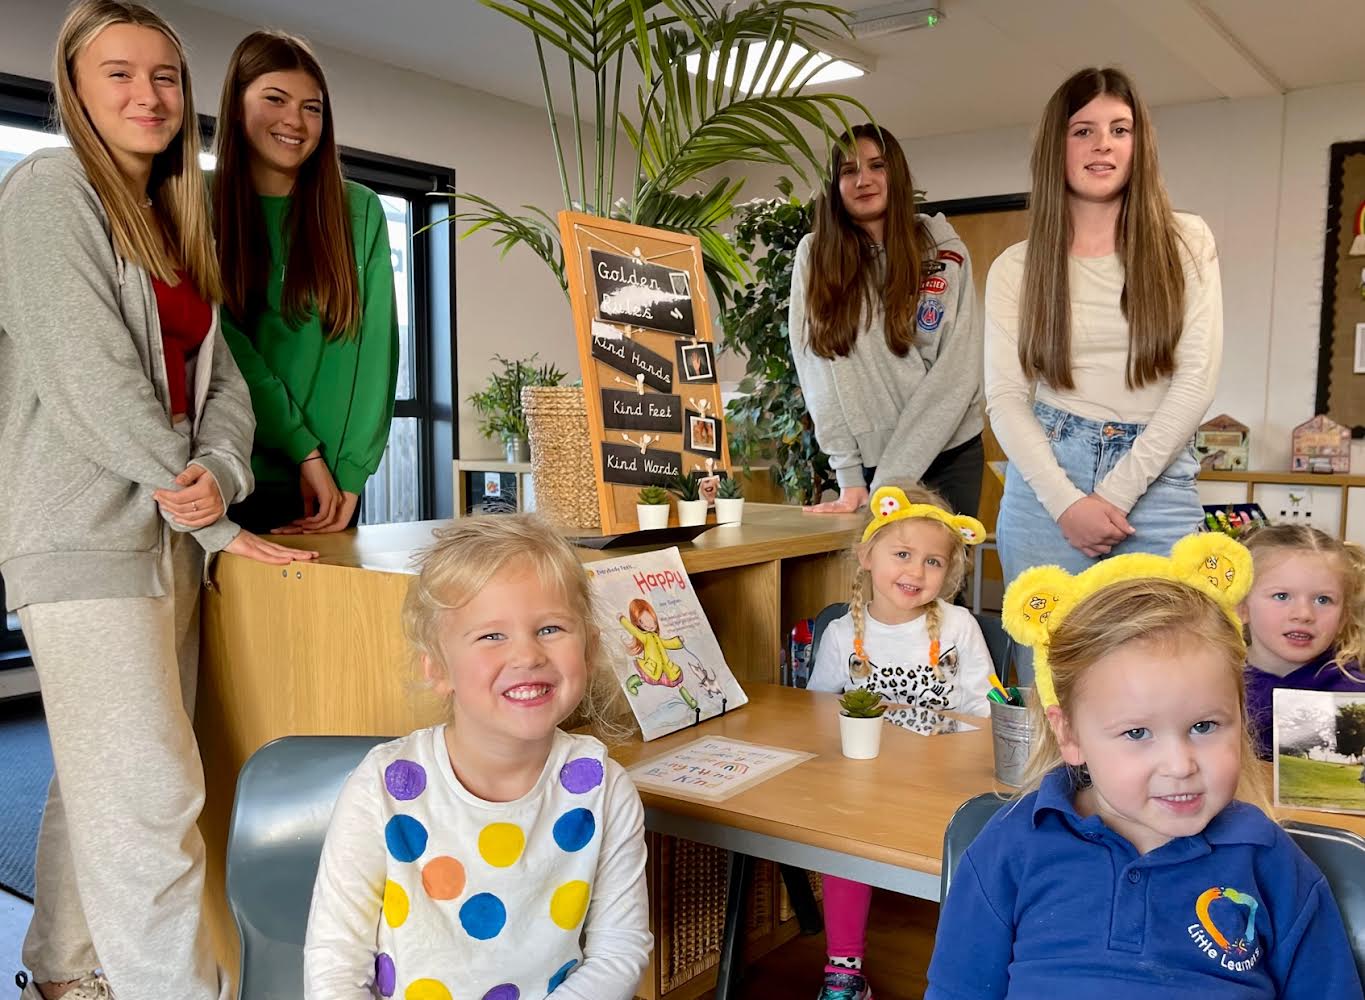 Child development students get incredible experience at brilliant Little Learners Nursery in exciting new initiative 